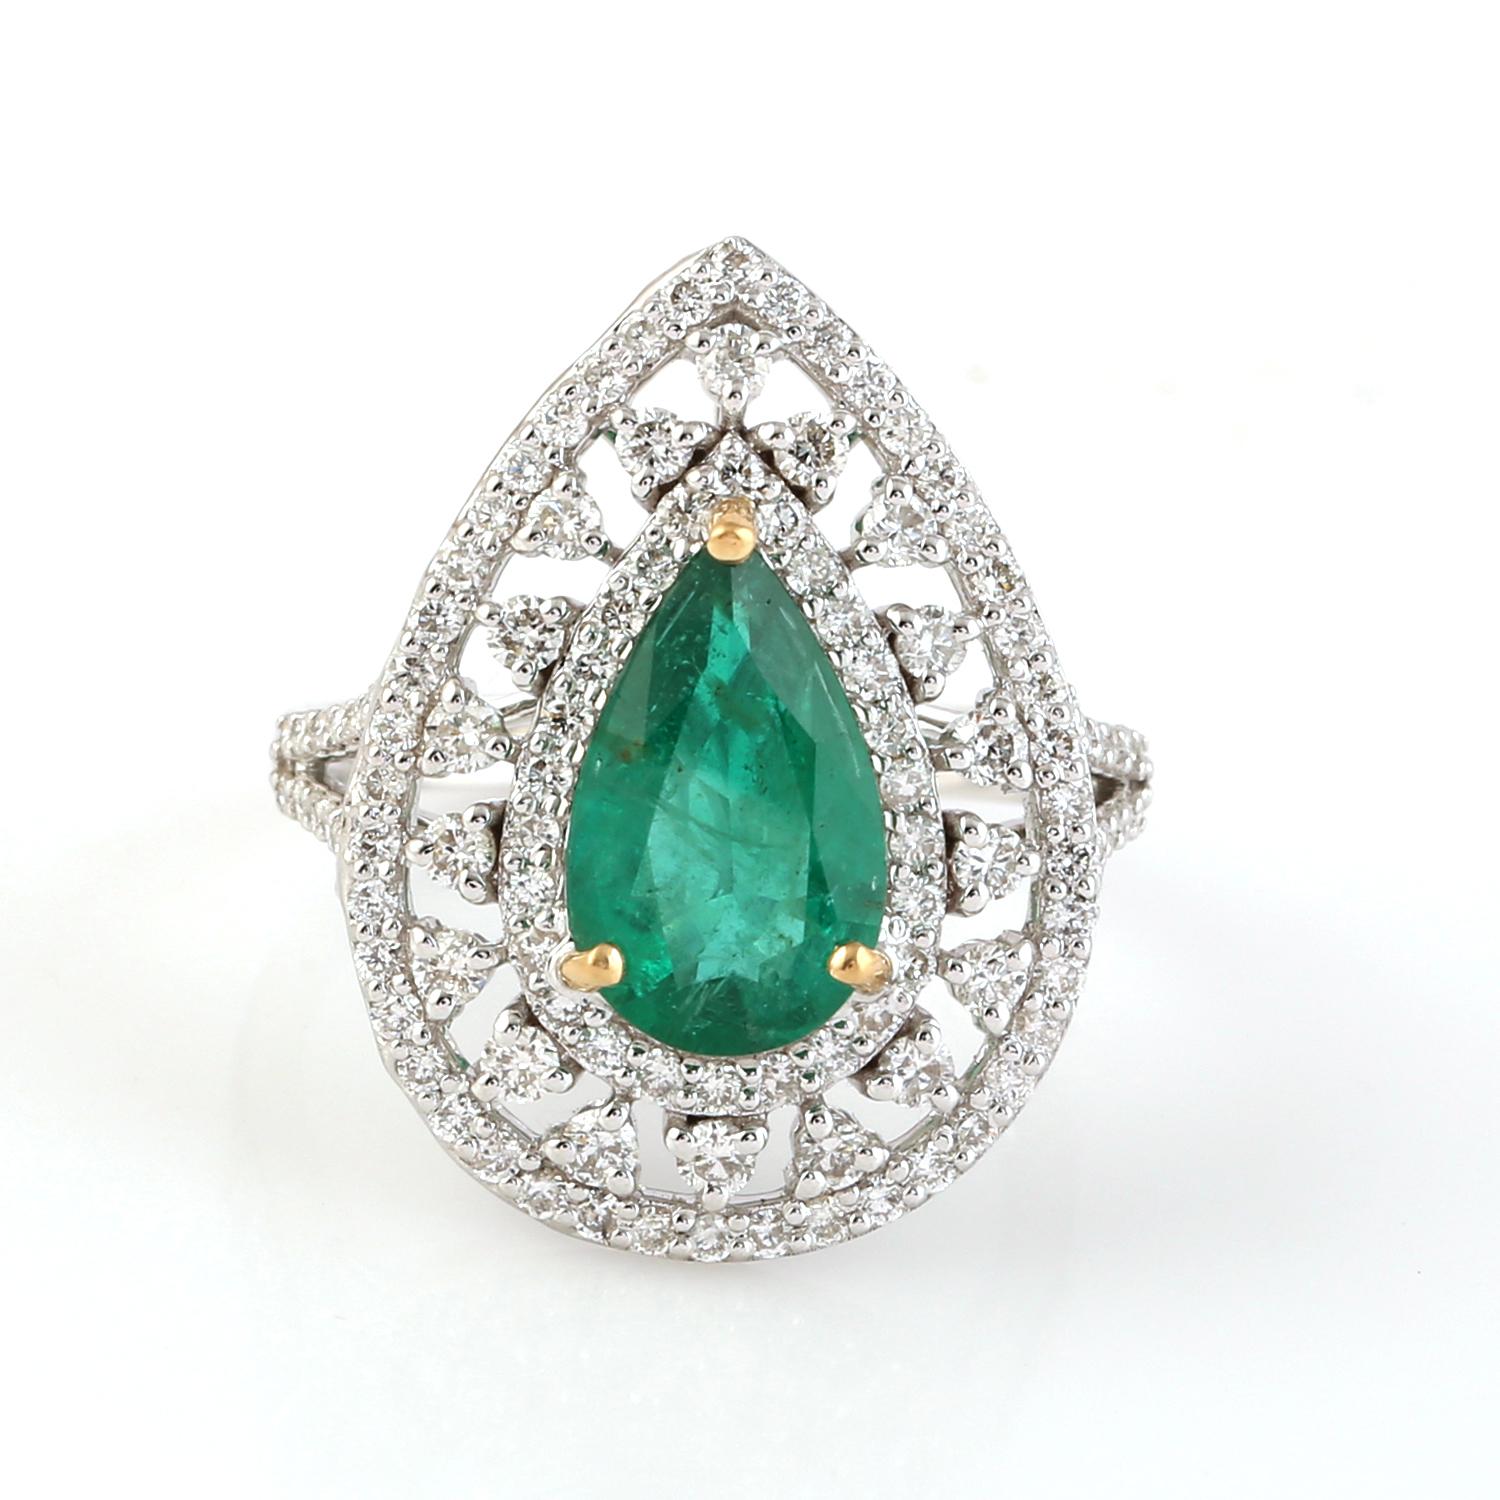 Contemporary Pear Drop Shaped Green Emerald Ring with Halo Diamonds Made in 18k White Gold For Sale